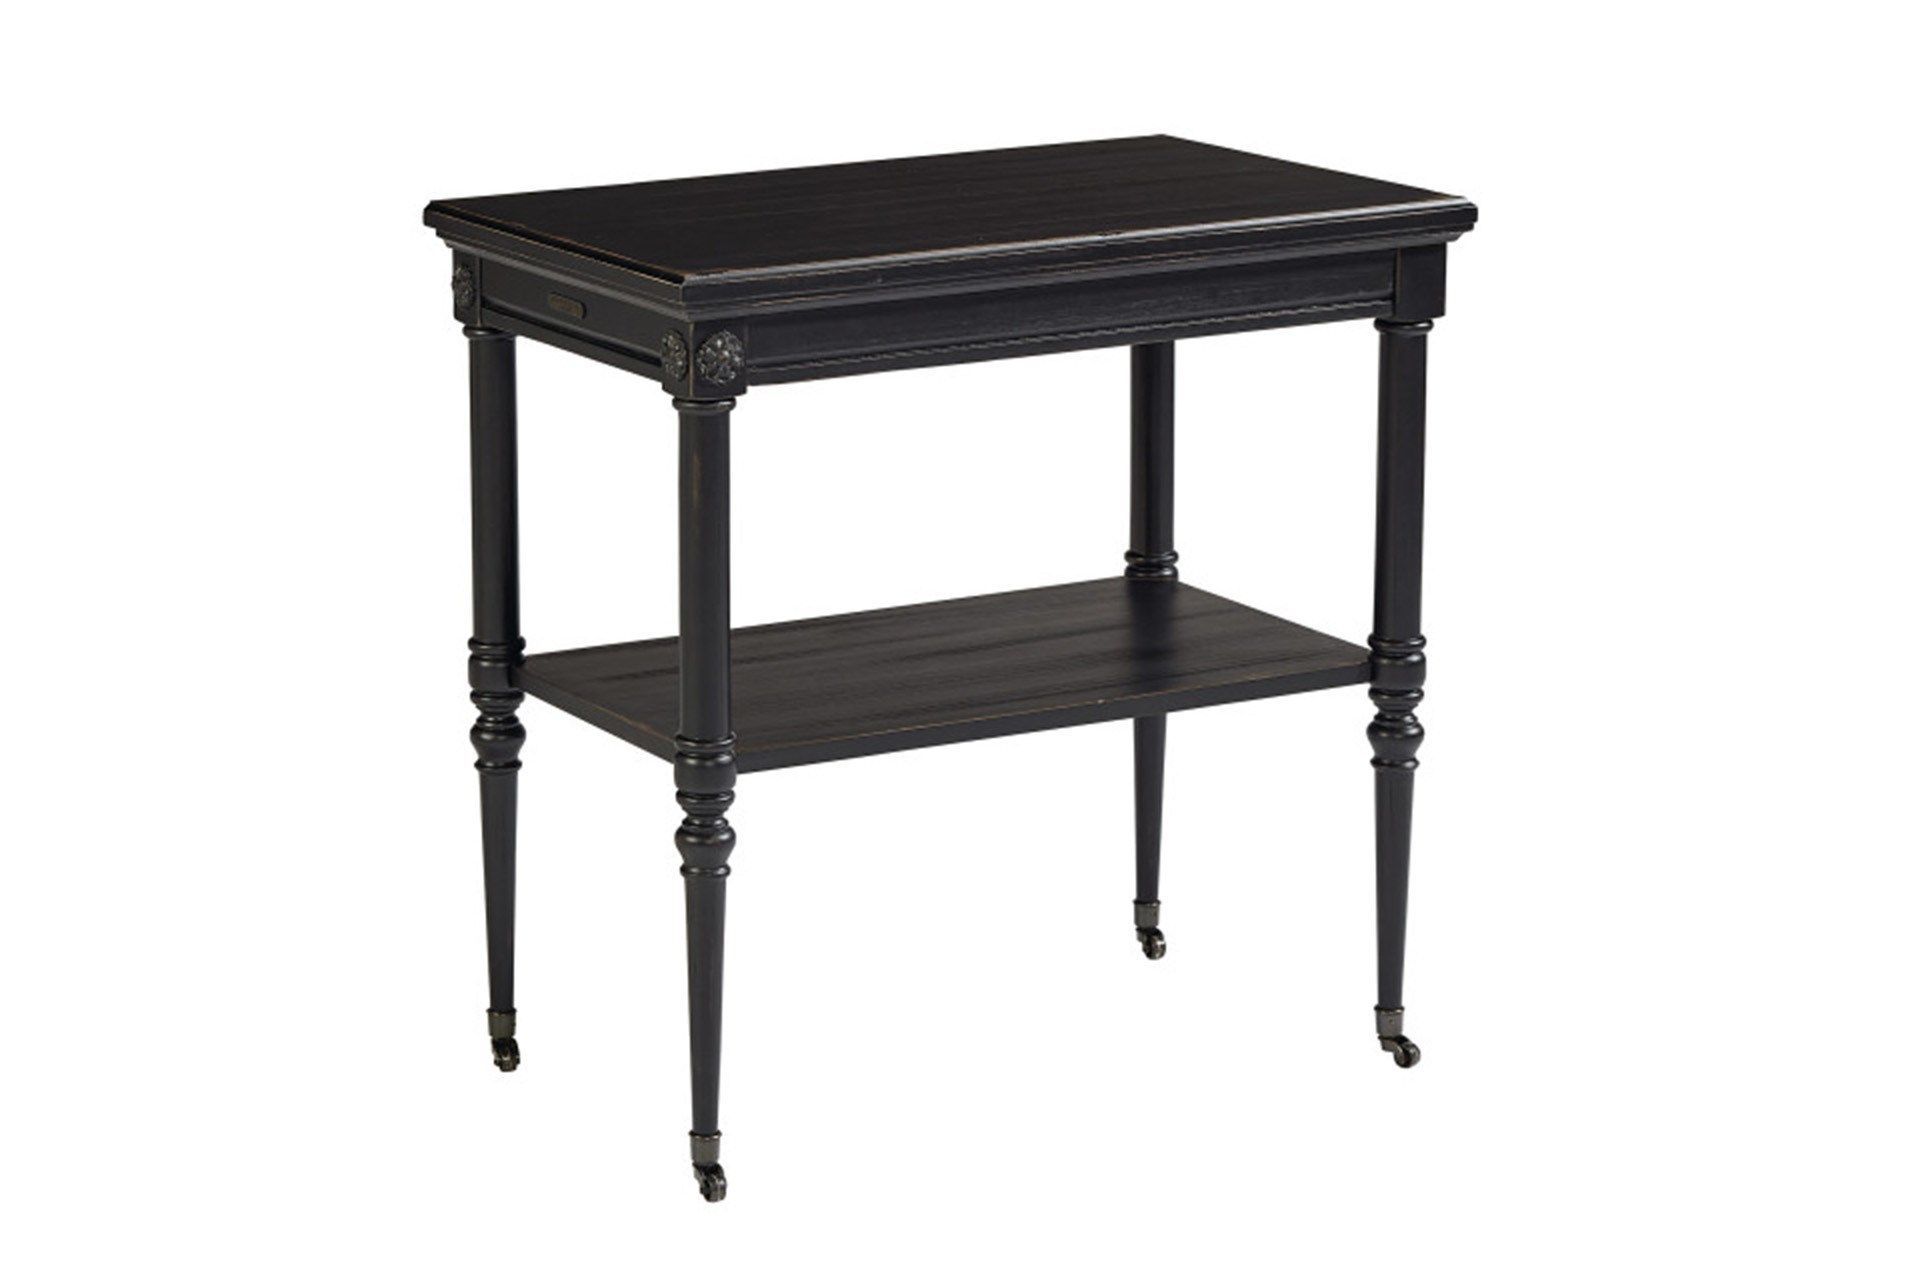 magnolia home petite rosette chimney accent table joanna gaines black end with basket qty has been successfully your cart ethan allen british classics dining chairs broyhill sofa